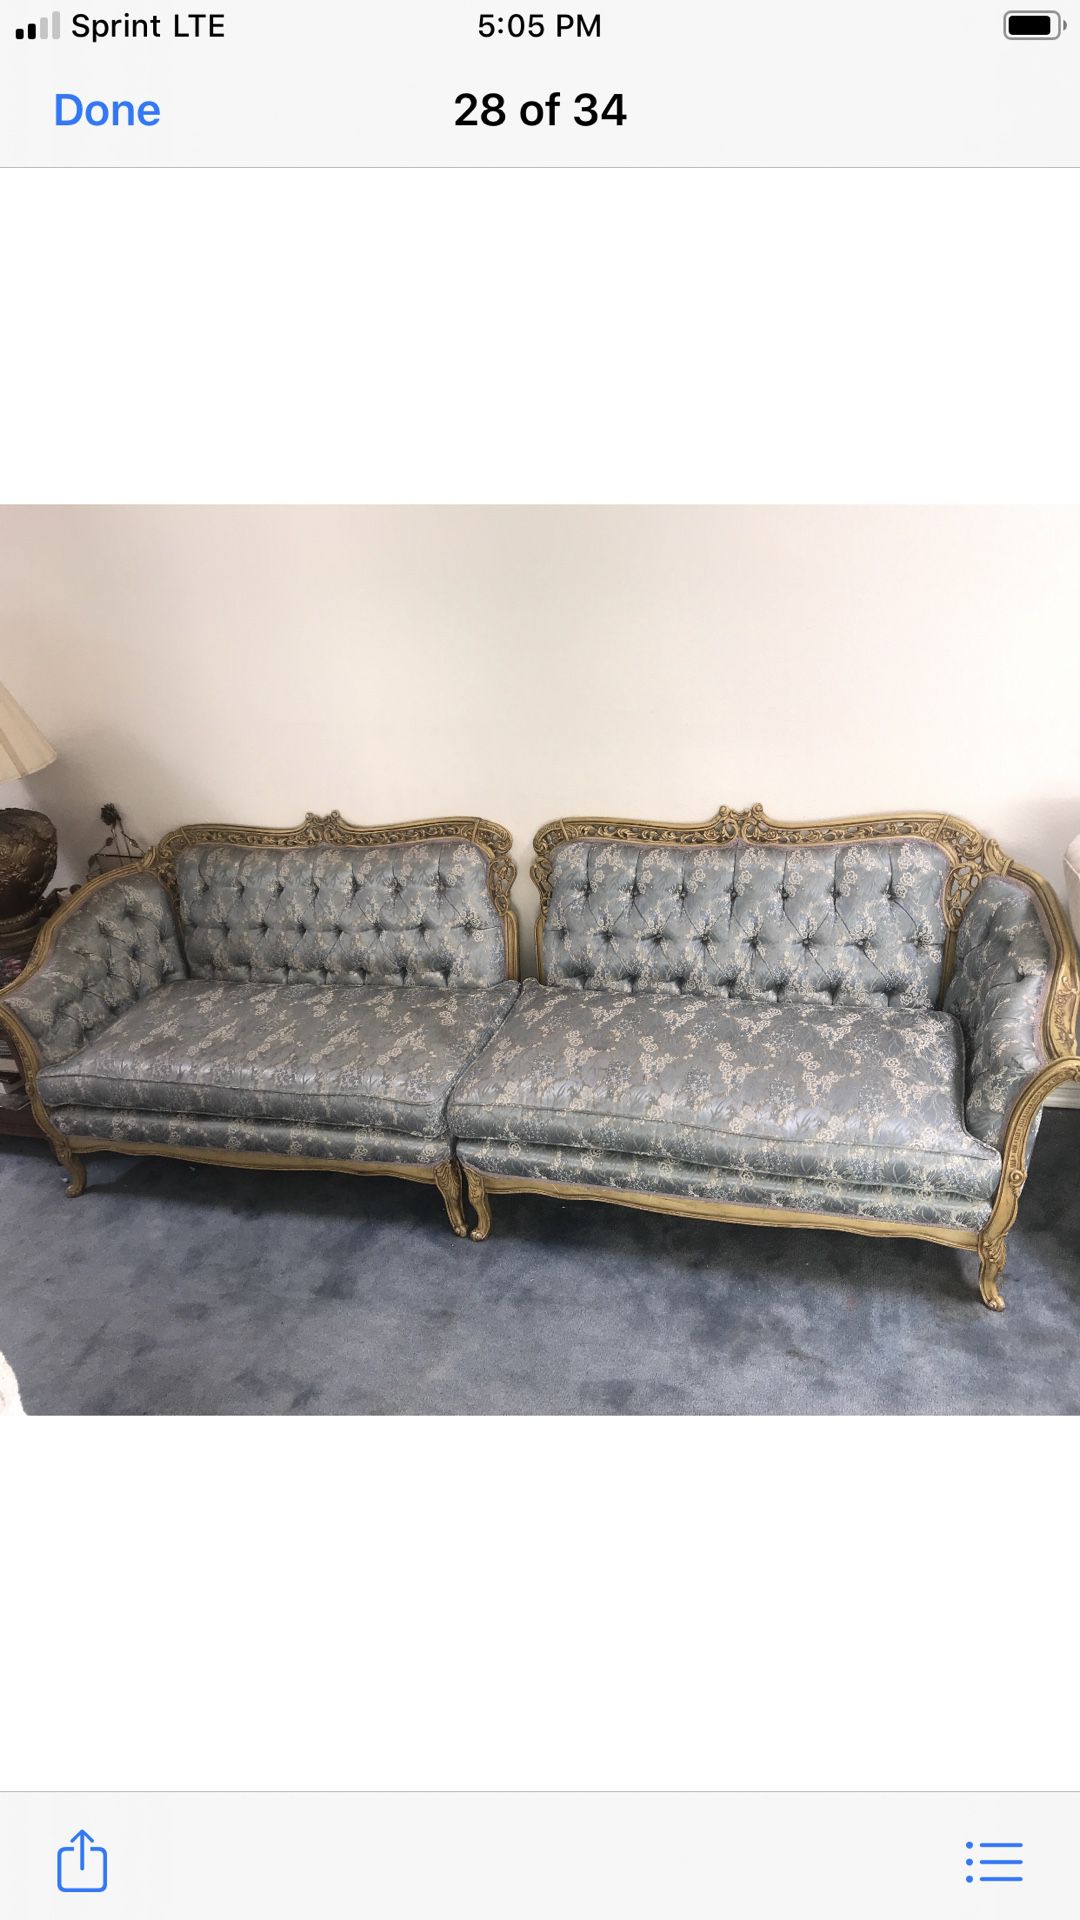 French provincial three-piece sectional sofa